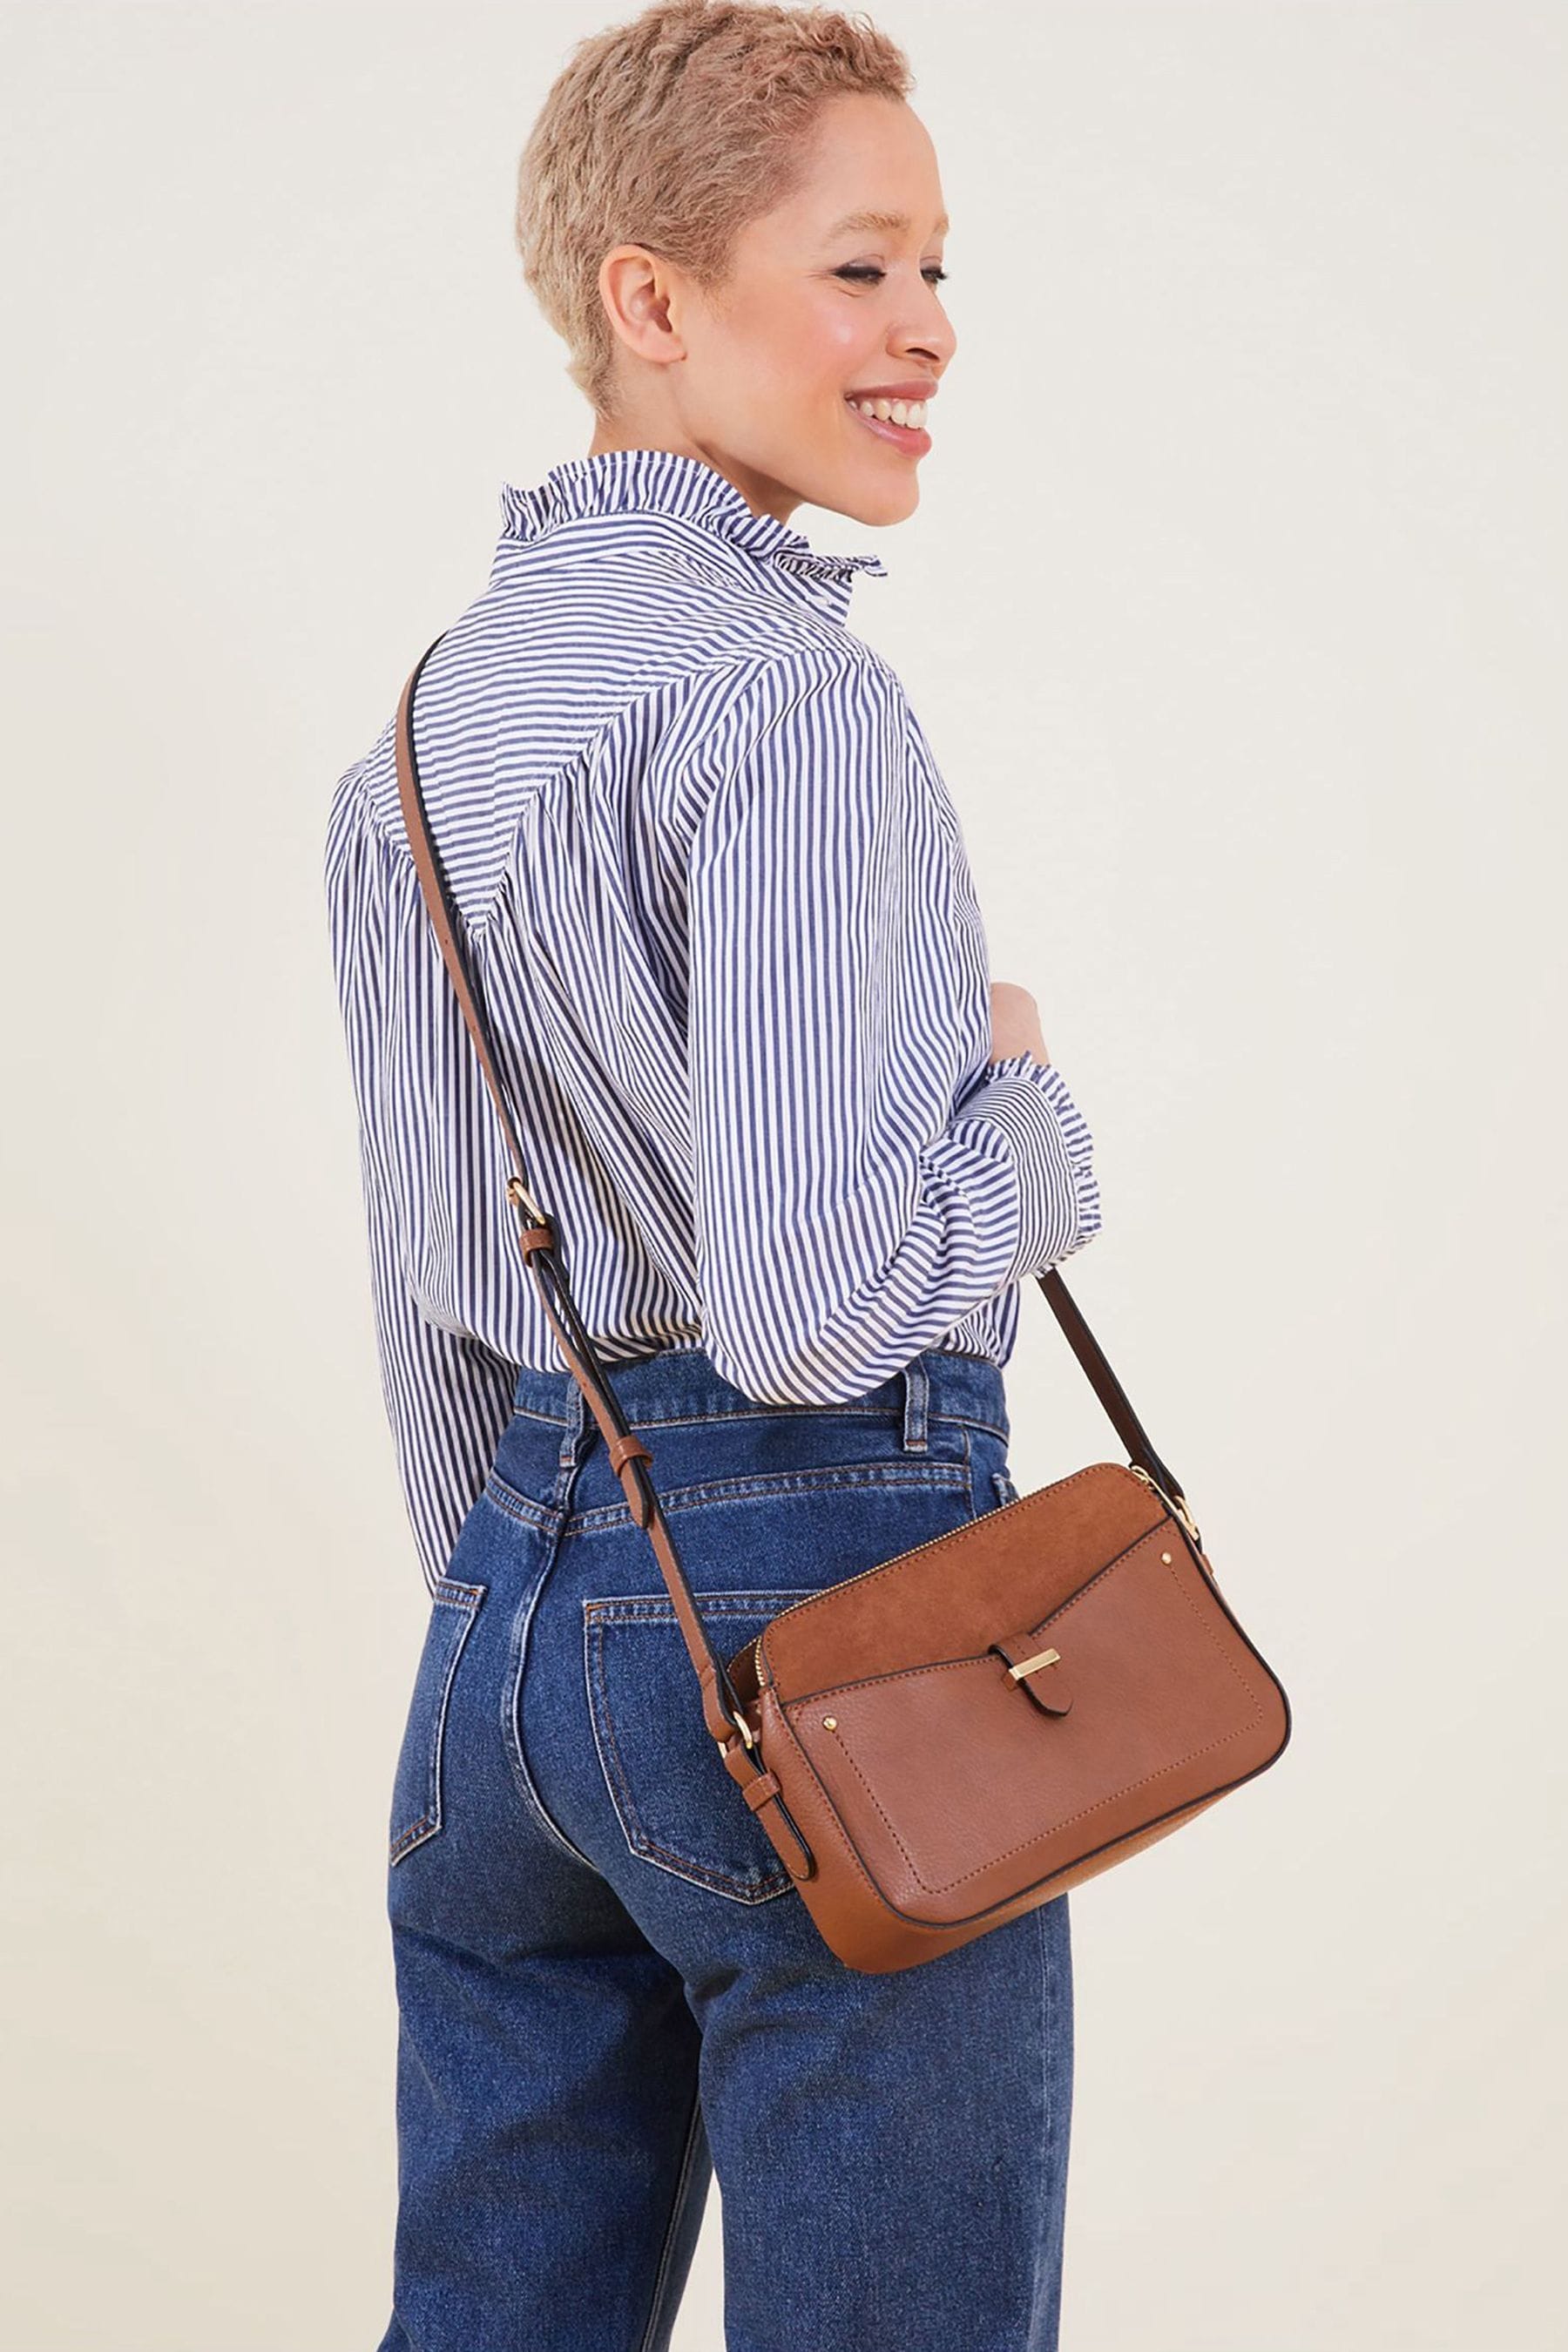 Buy Accessorize Natural Shelby Cross-Body Bag from the Next UK online shop